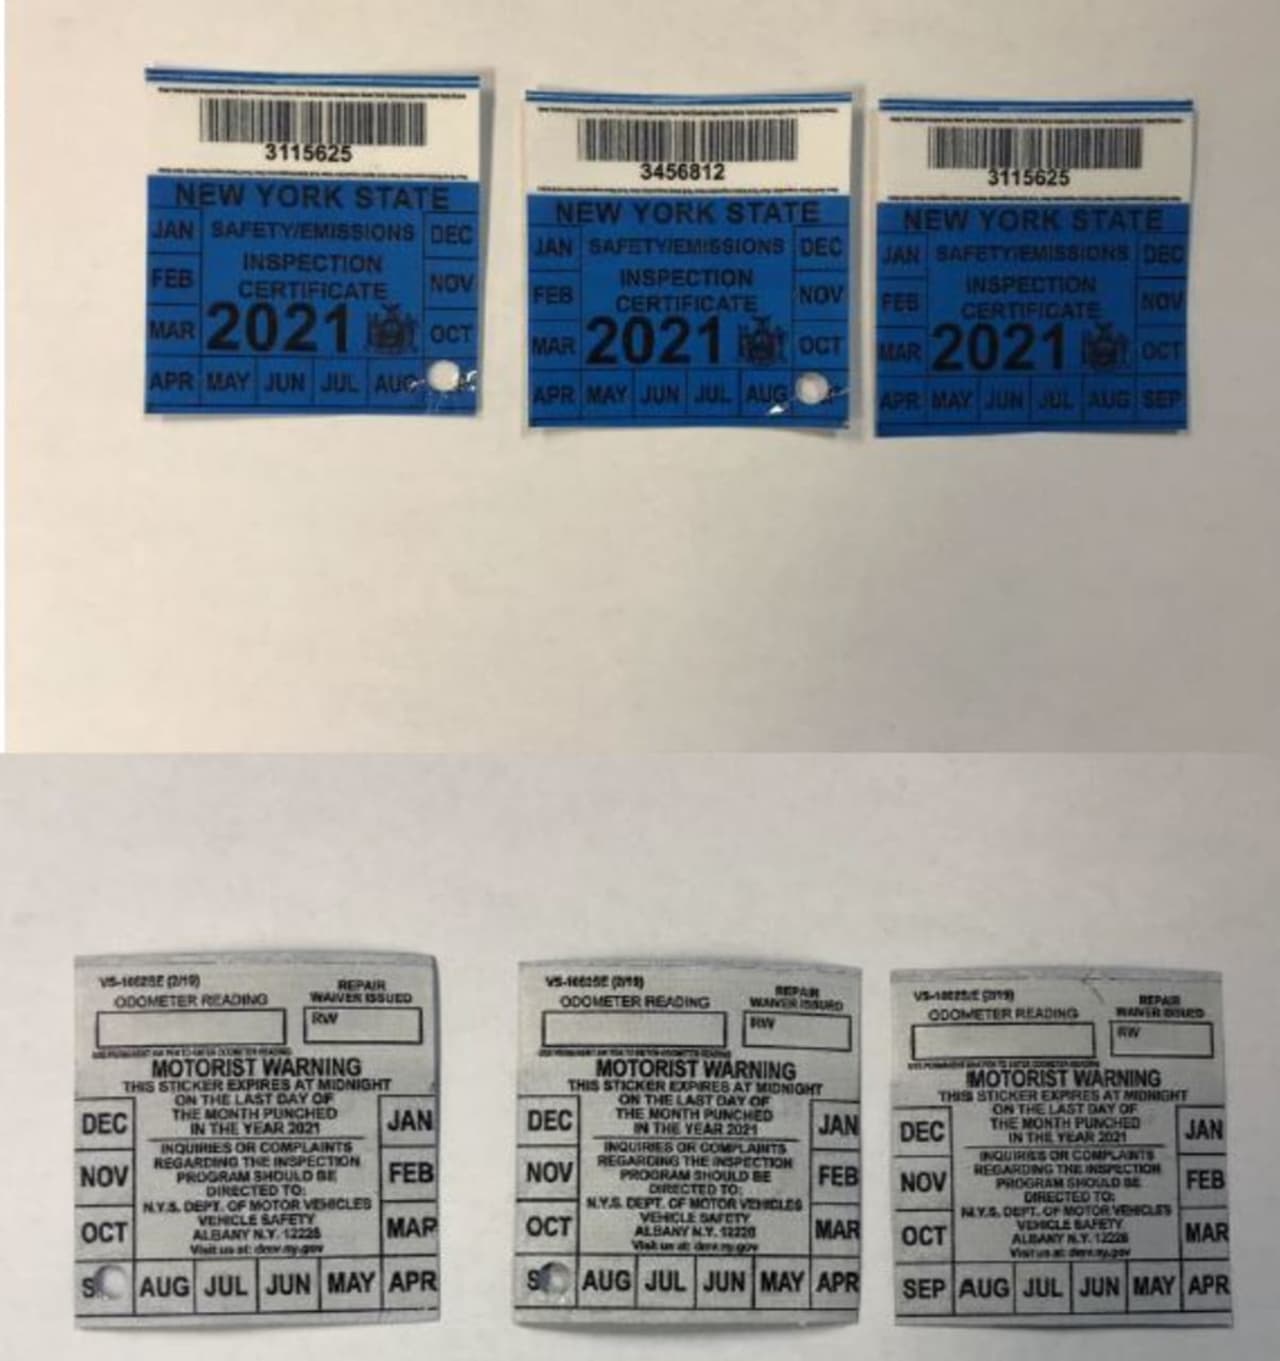 Counterfeit inspection tickets advertised on Facebook marketplace by Luis Pina-Perez of Tarrytown